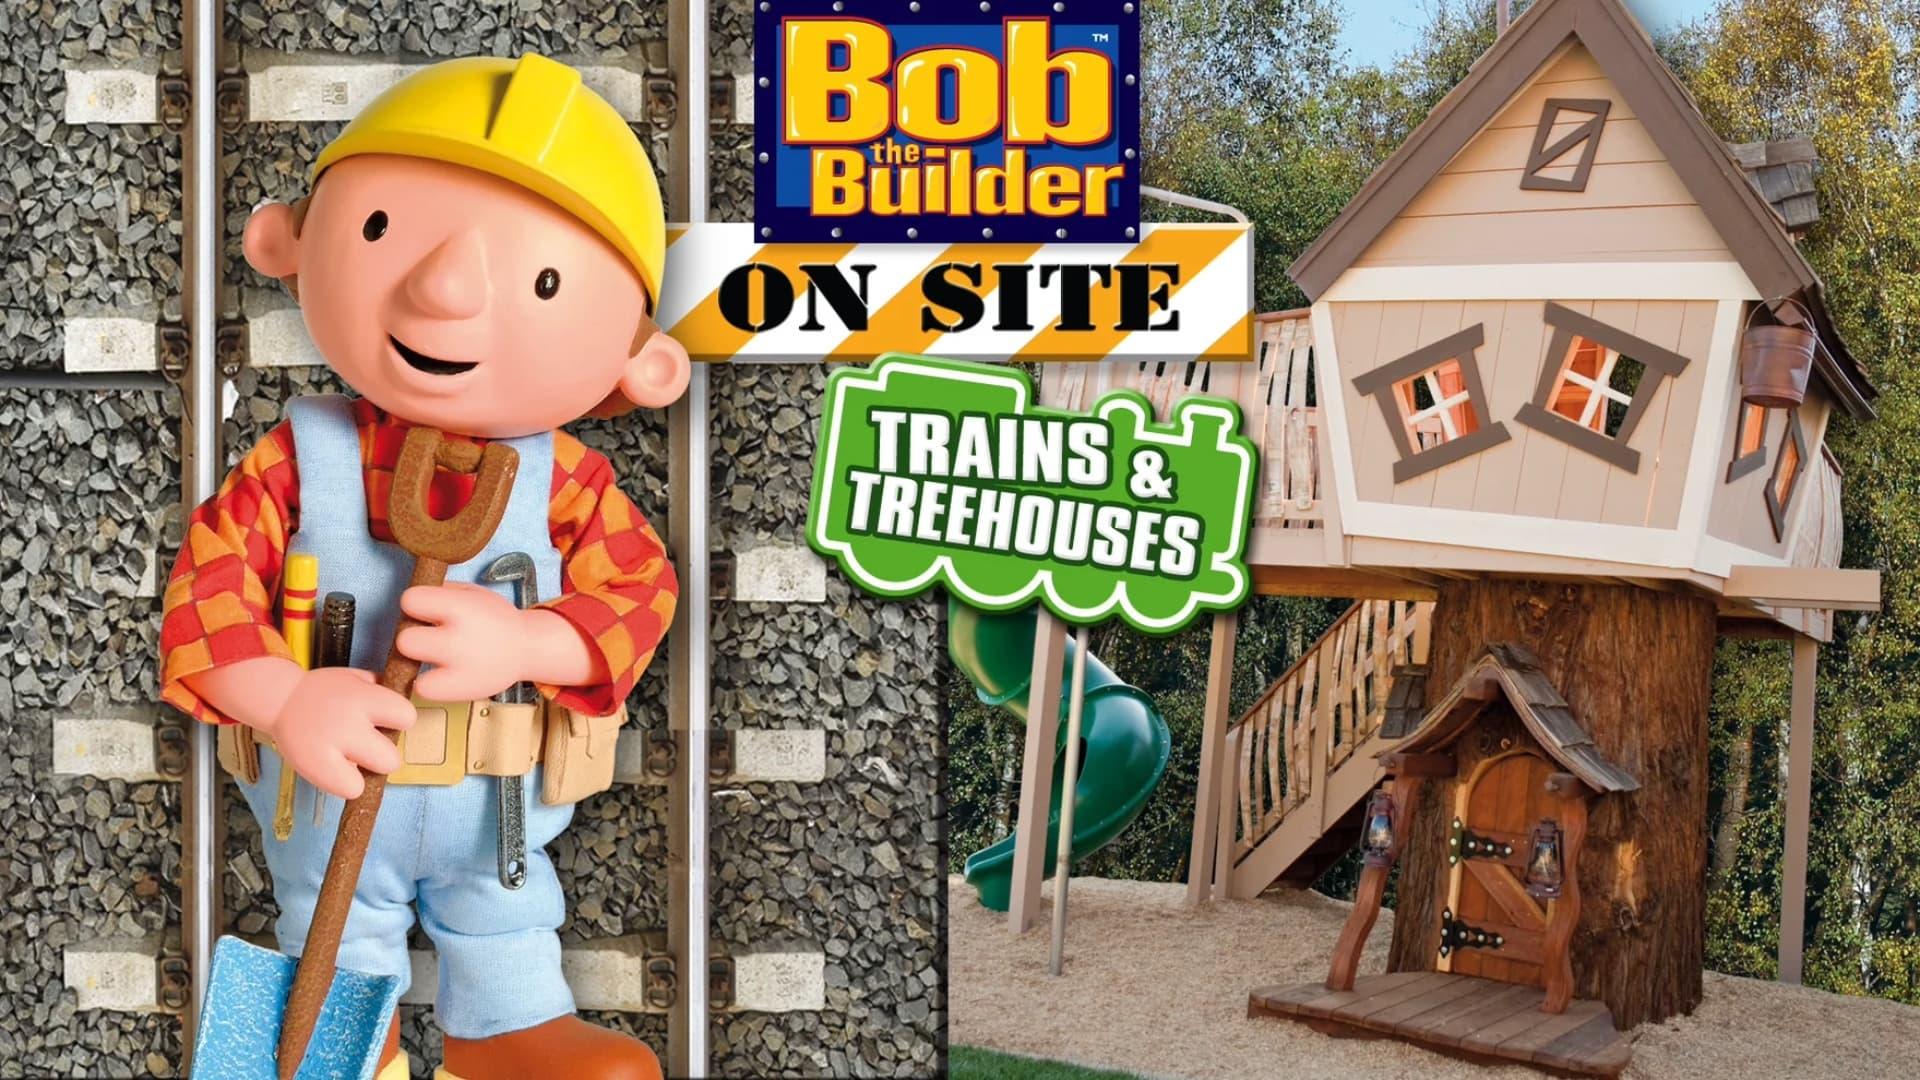 Bob the Builder On Site: Trains & Treehouses backdrop